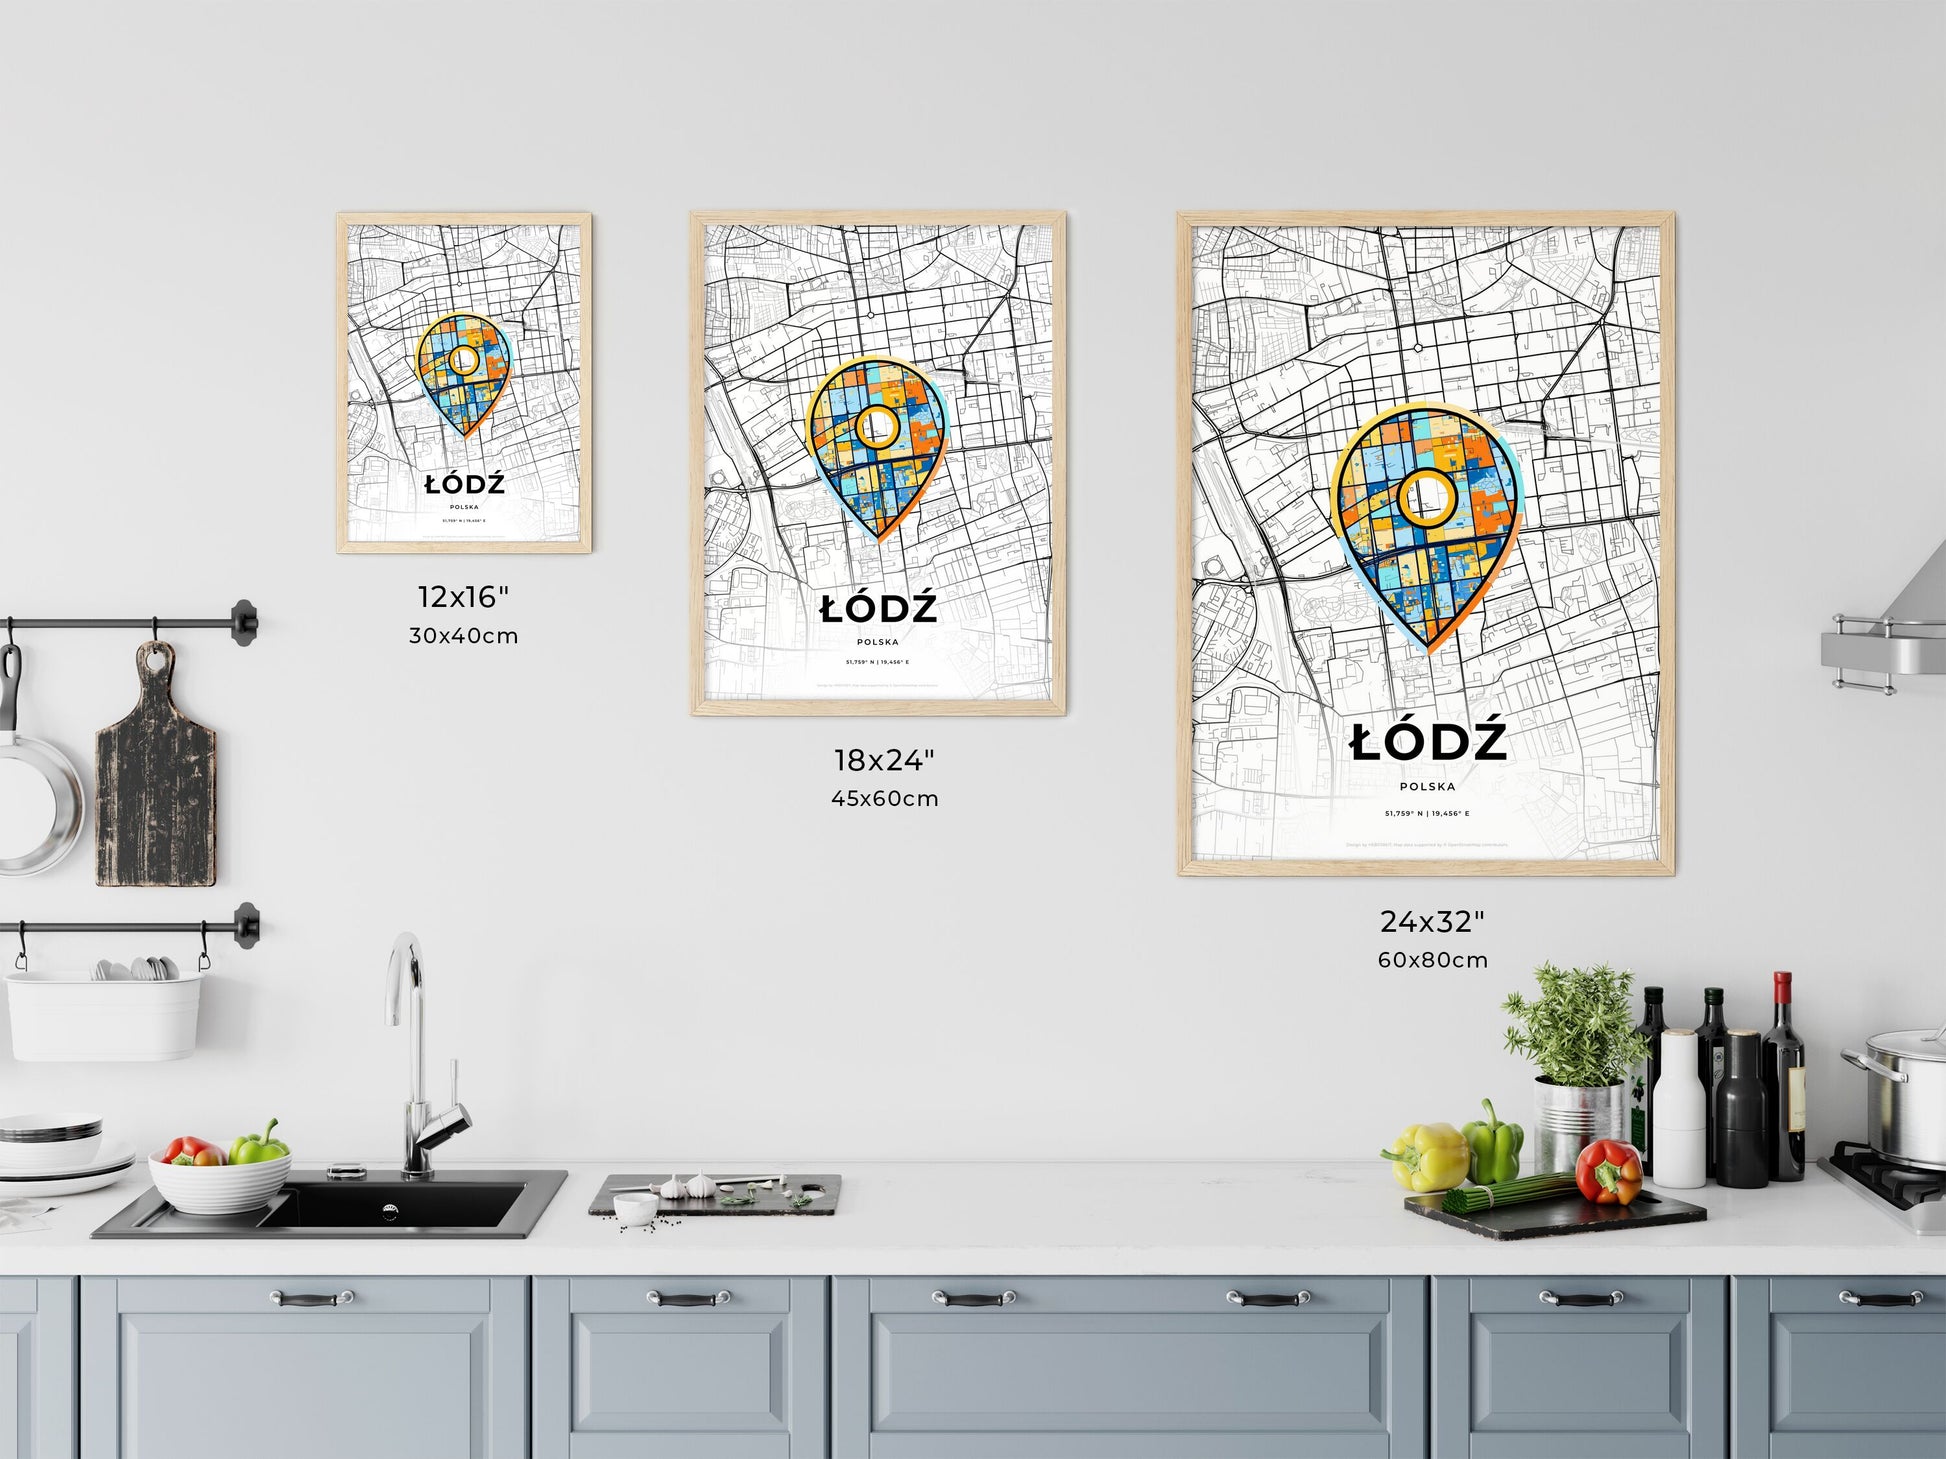 ŁÓDŹ POLAND minimal art map with a colorful icon. Where it all began, Couple map gift.